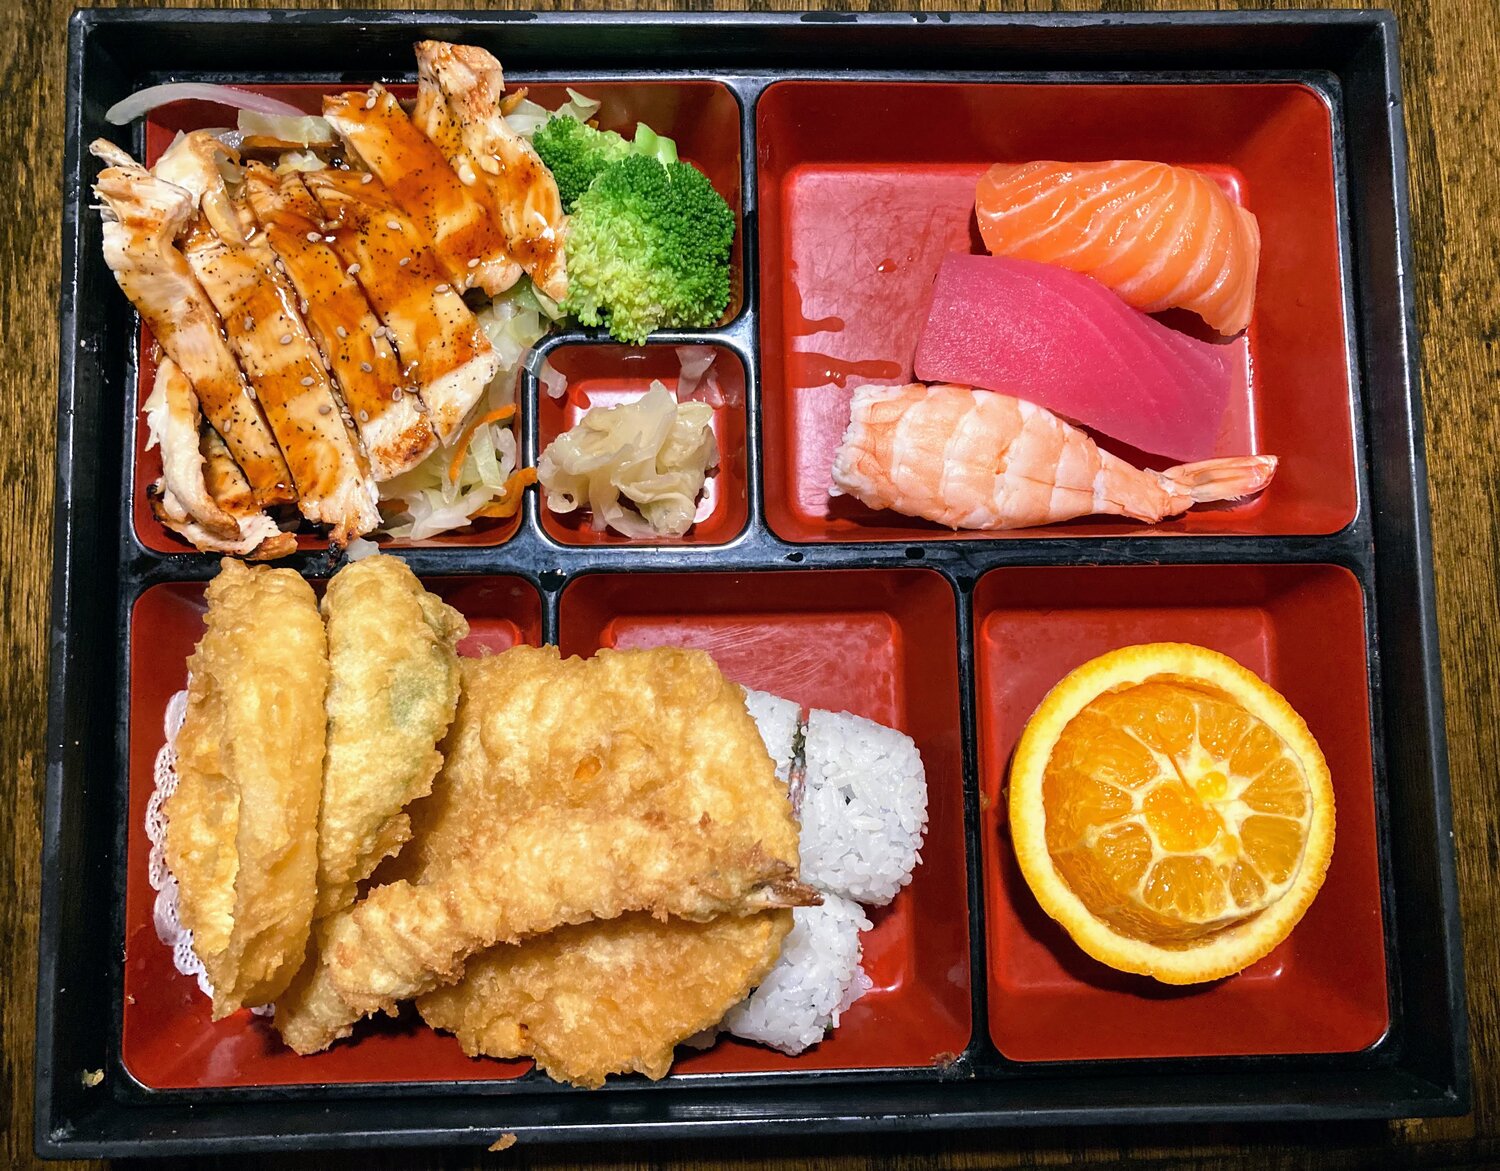 Sushi Moto offers eight variations of bento boxes to choose from on its lunch menu. The Moto Bento box includes chicken teriyaki; shrimp and vegetable tempura; a California roll; salmon, tuna and shrimp nigiri; and fresh orange slices, all of which are delectable.